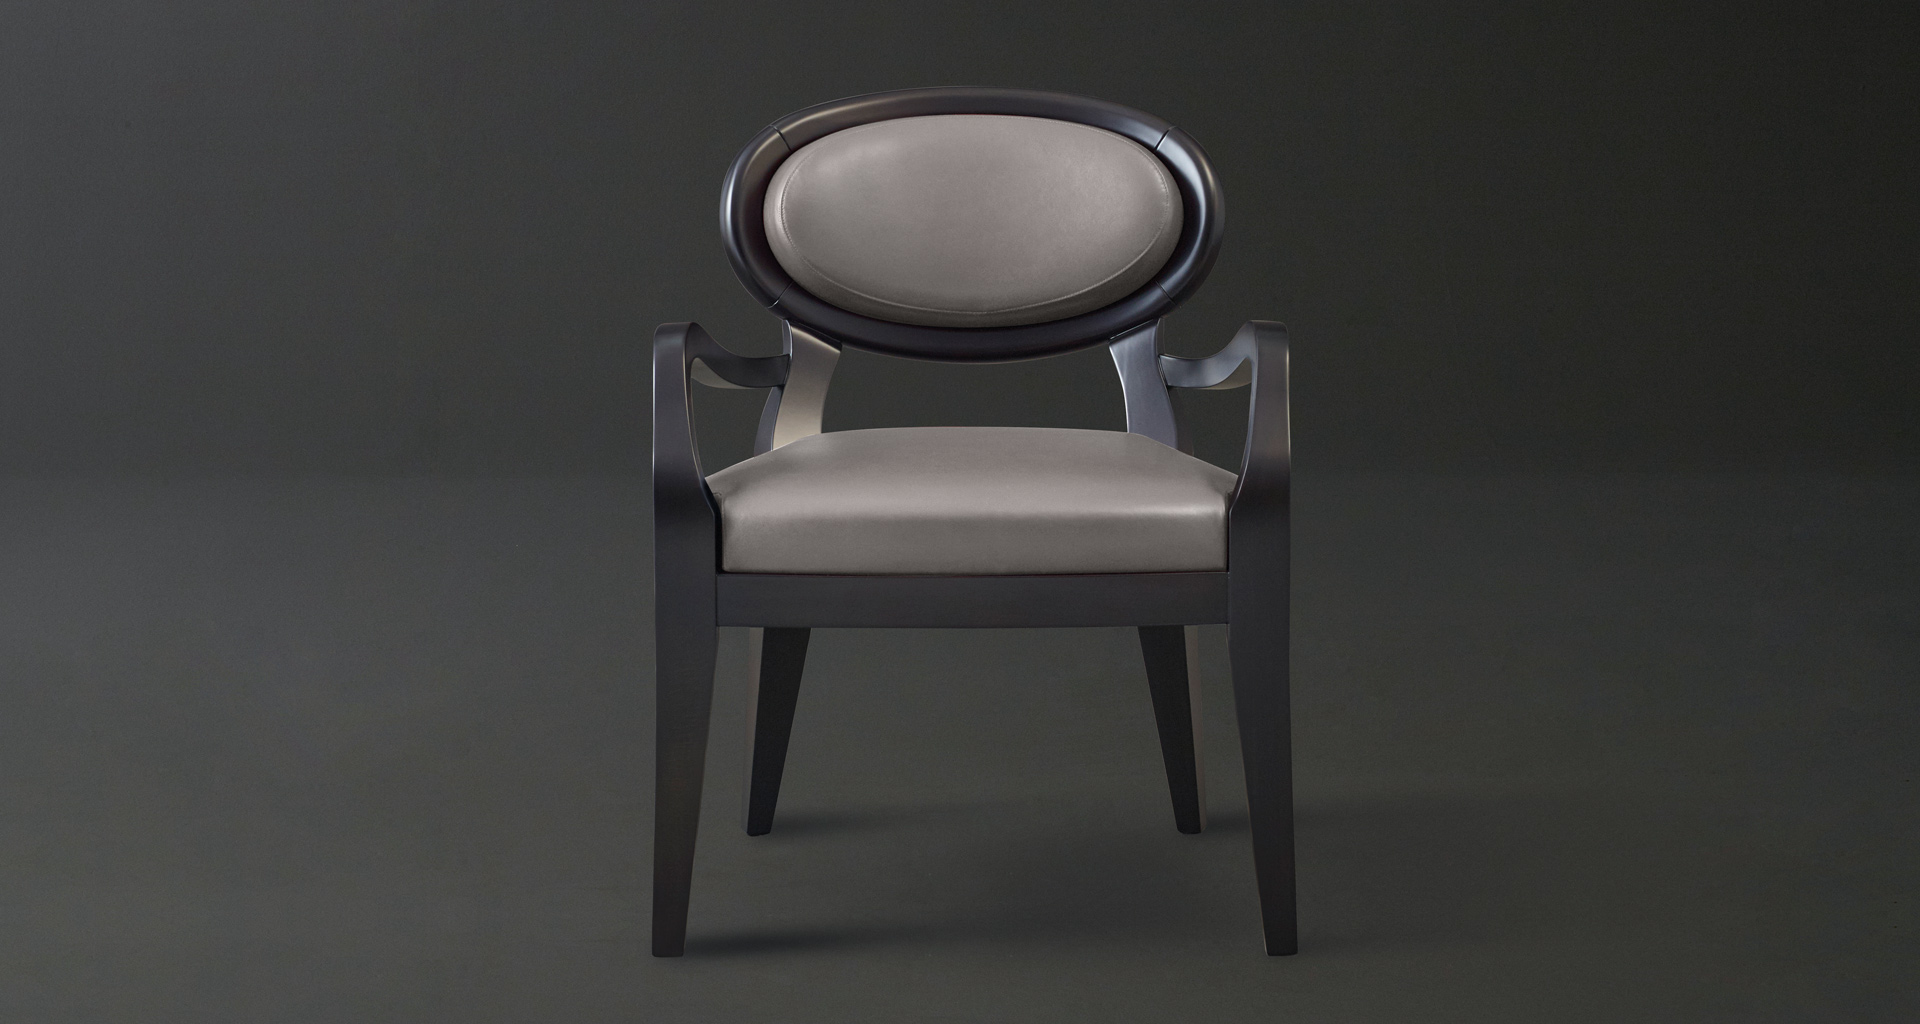 Anima is a wooden and fabric or leather dining chair available with different combinations of fabrics and colors, from Promemoria's catalogue | Promemoria